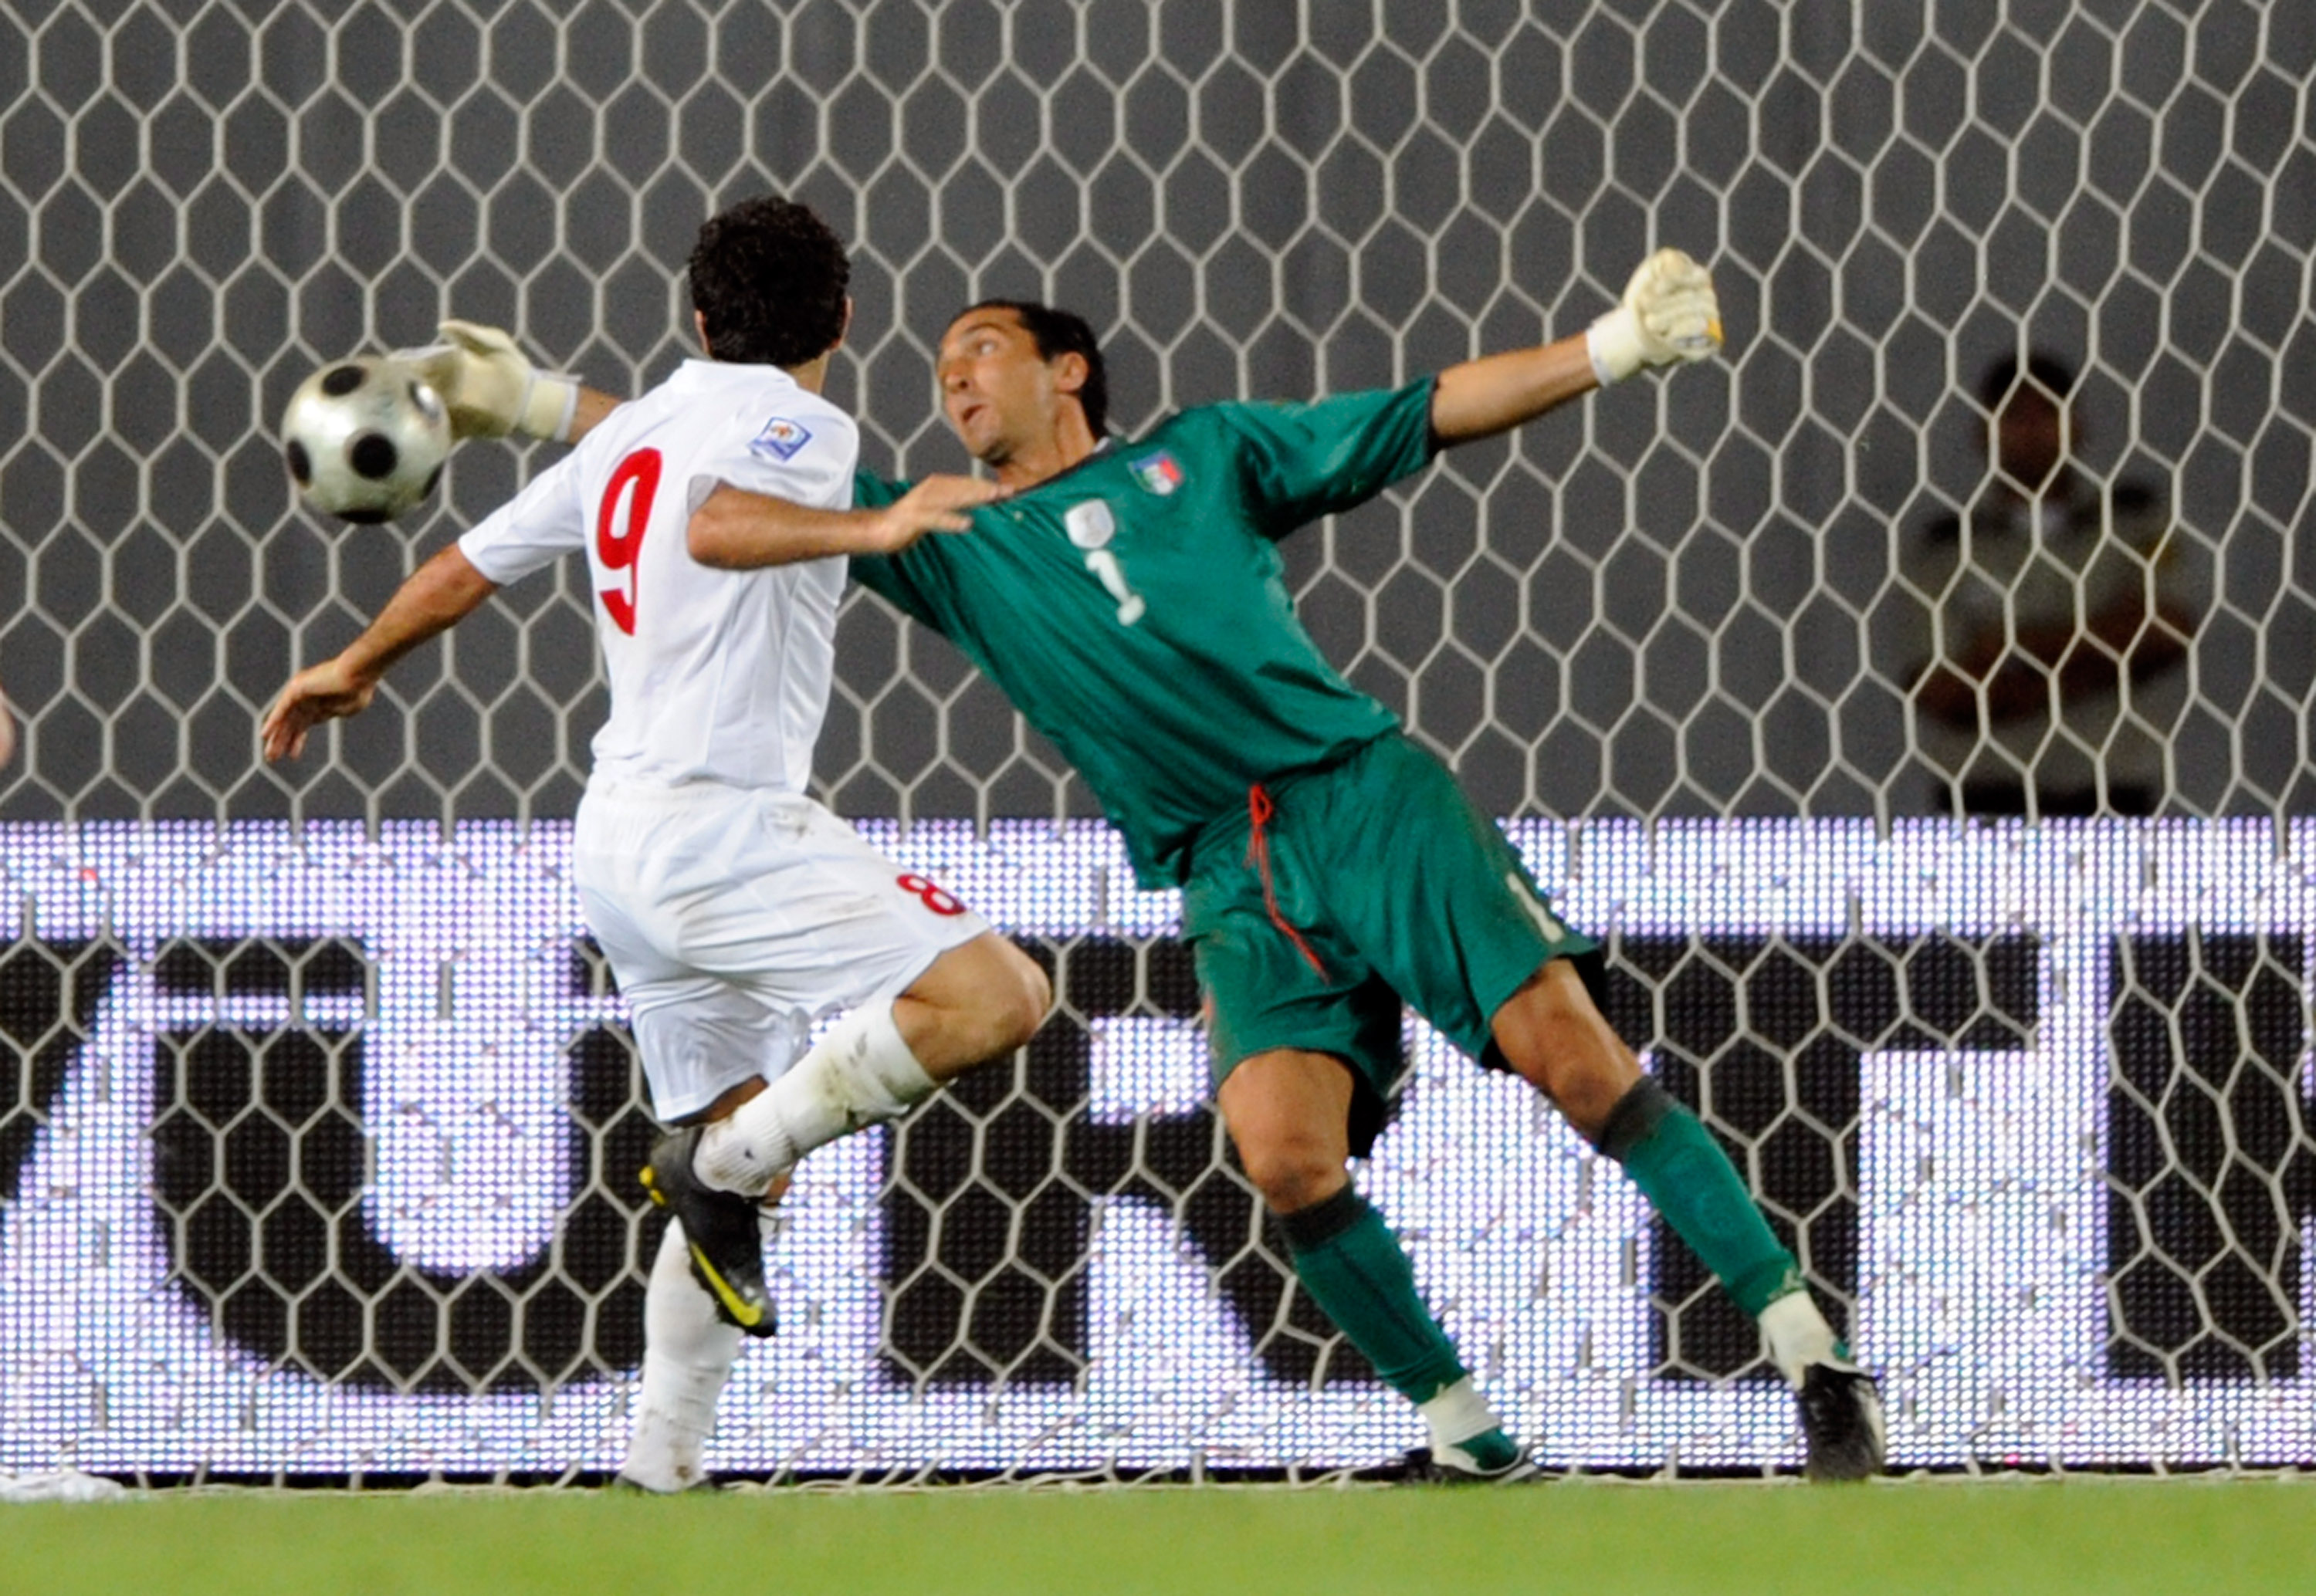 TBILISI, GEORGIA - SEPTEMBER 05: Gianluigi Buffon of Italy and Vladimer Dvalishvili of Georgia defends the goal during the FIFA 2010 World Cup Qualifier match between Georgia and Italy at Boris Paichadze National Stadium on September 5, 2009 in Tbilisi, G